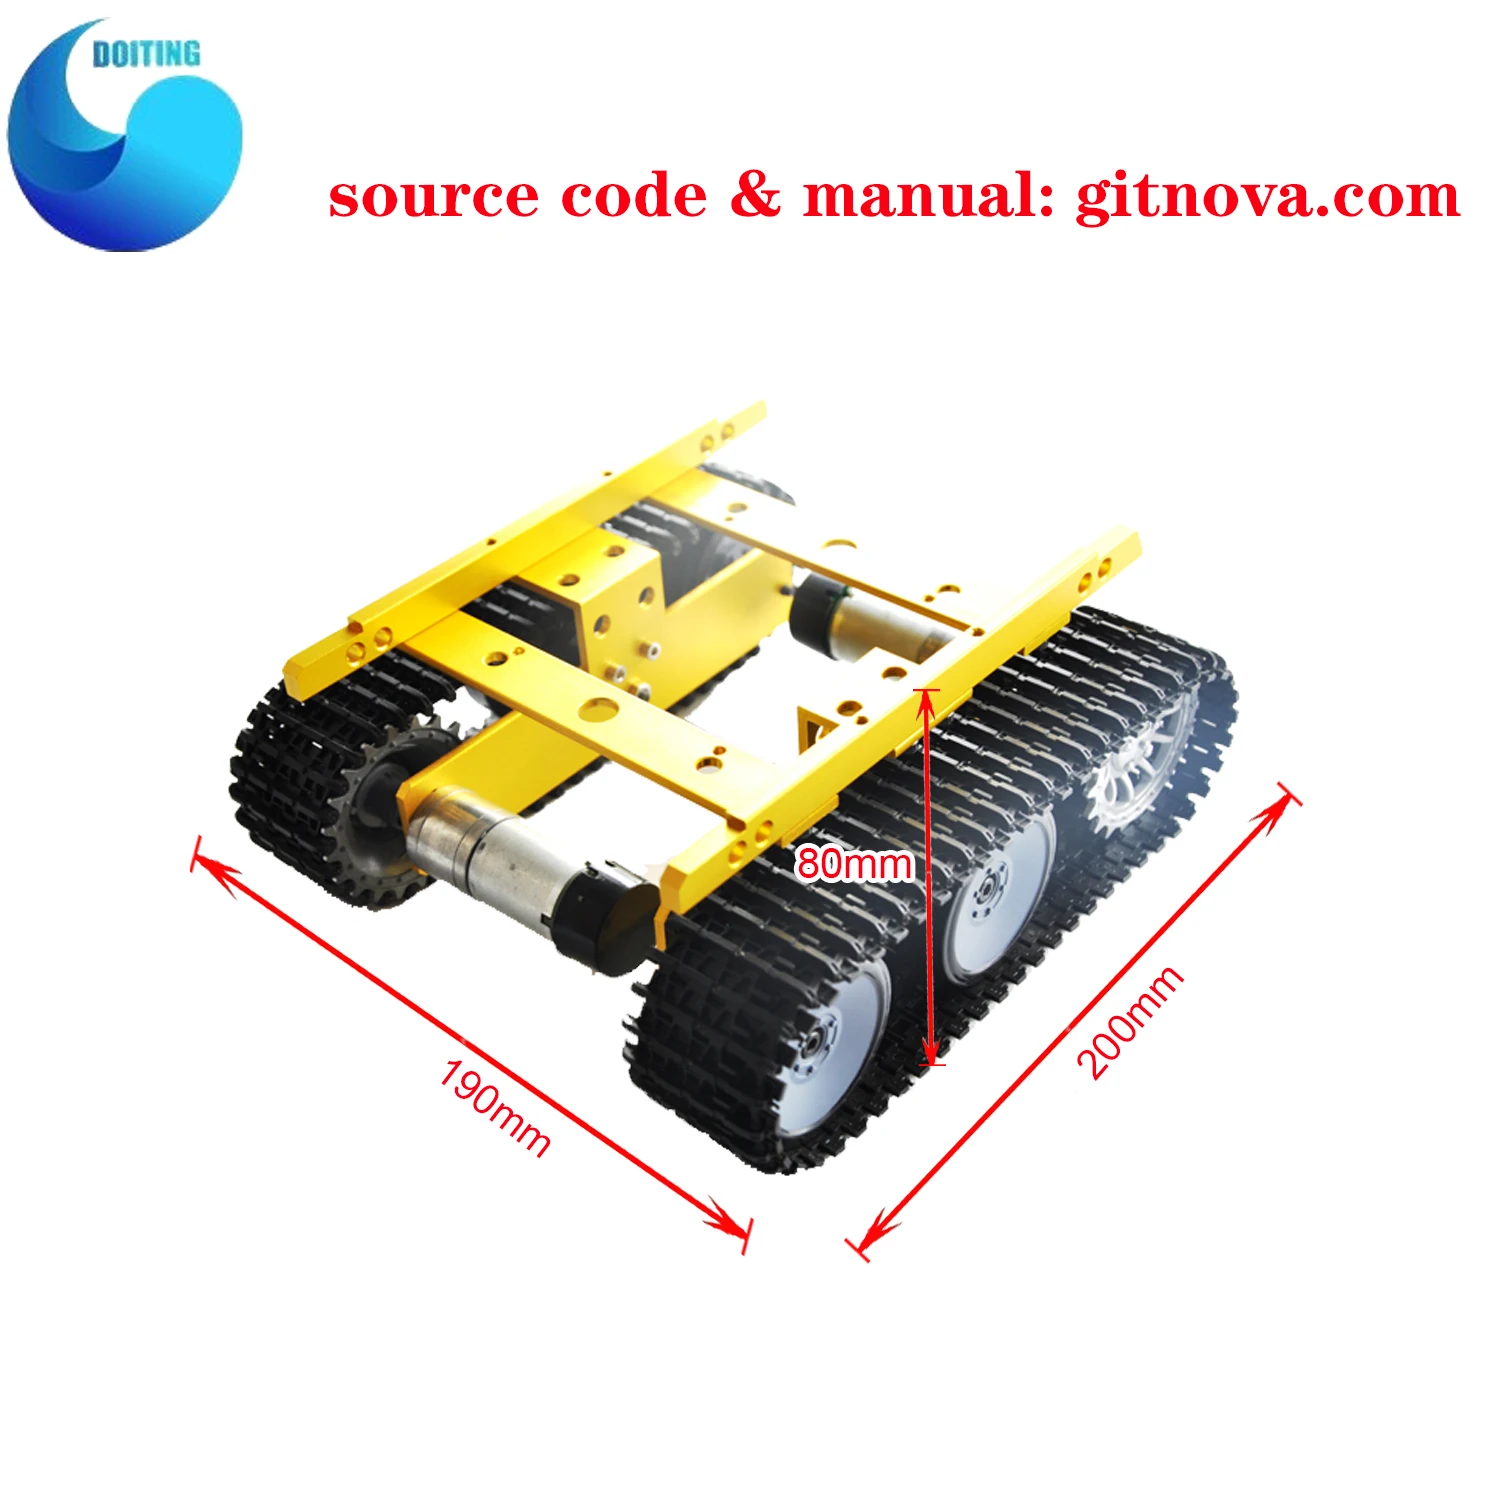 Tank Chassis car kit with Speed Sensor Creeper Truck Tracked Smart Car with High Torque Motors and Hall Sensor DIY Toy enlarge